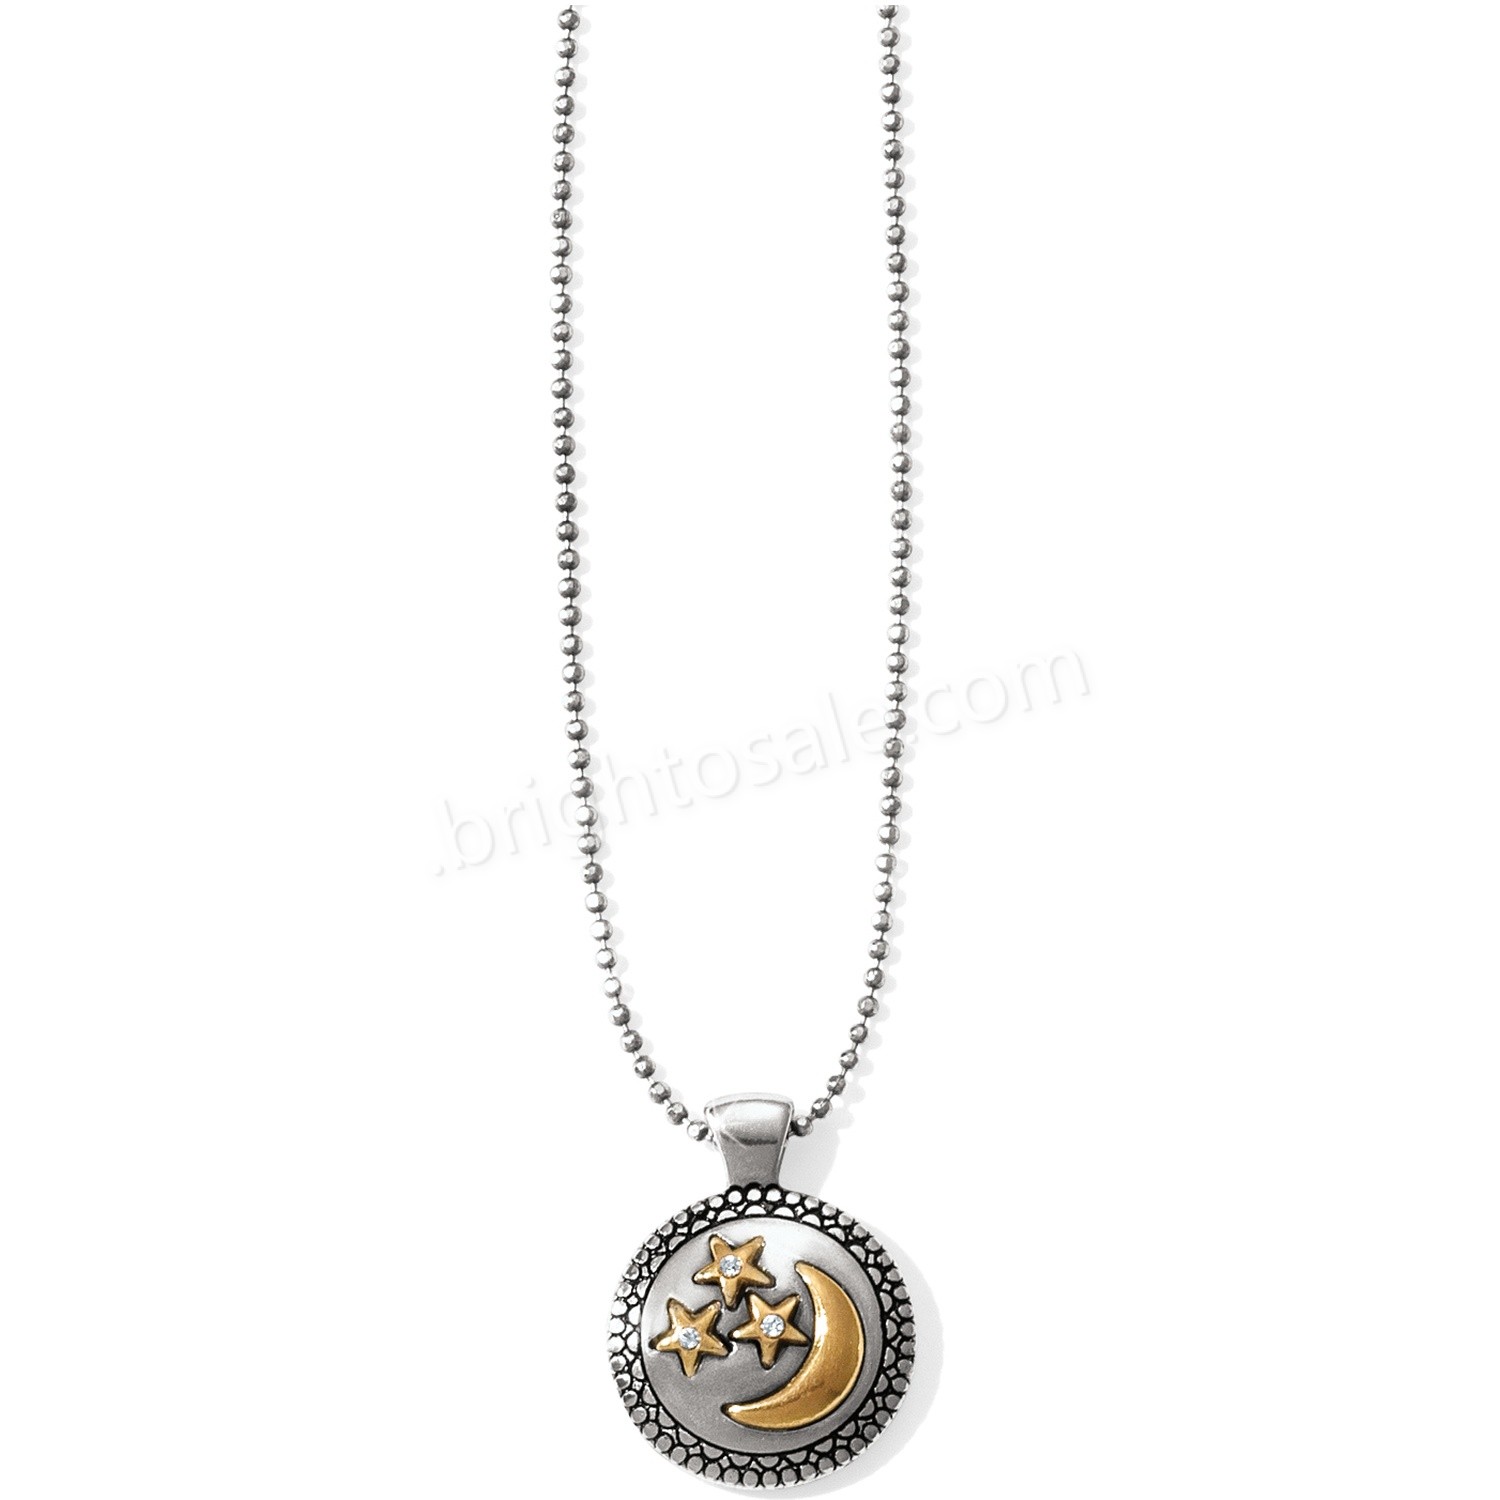 Brighton Collectibles & Online Discount Cherished Stars & Moon Petite Necklace - Brighton Collectibles & Online Discount Cherished Stars & Moon Petite Necklace